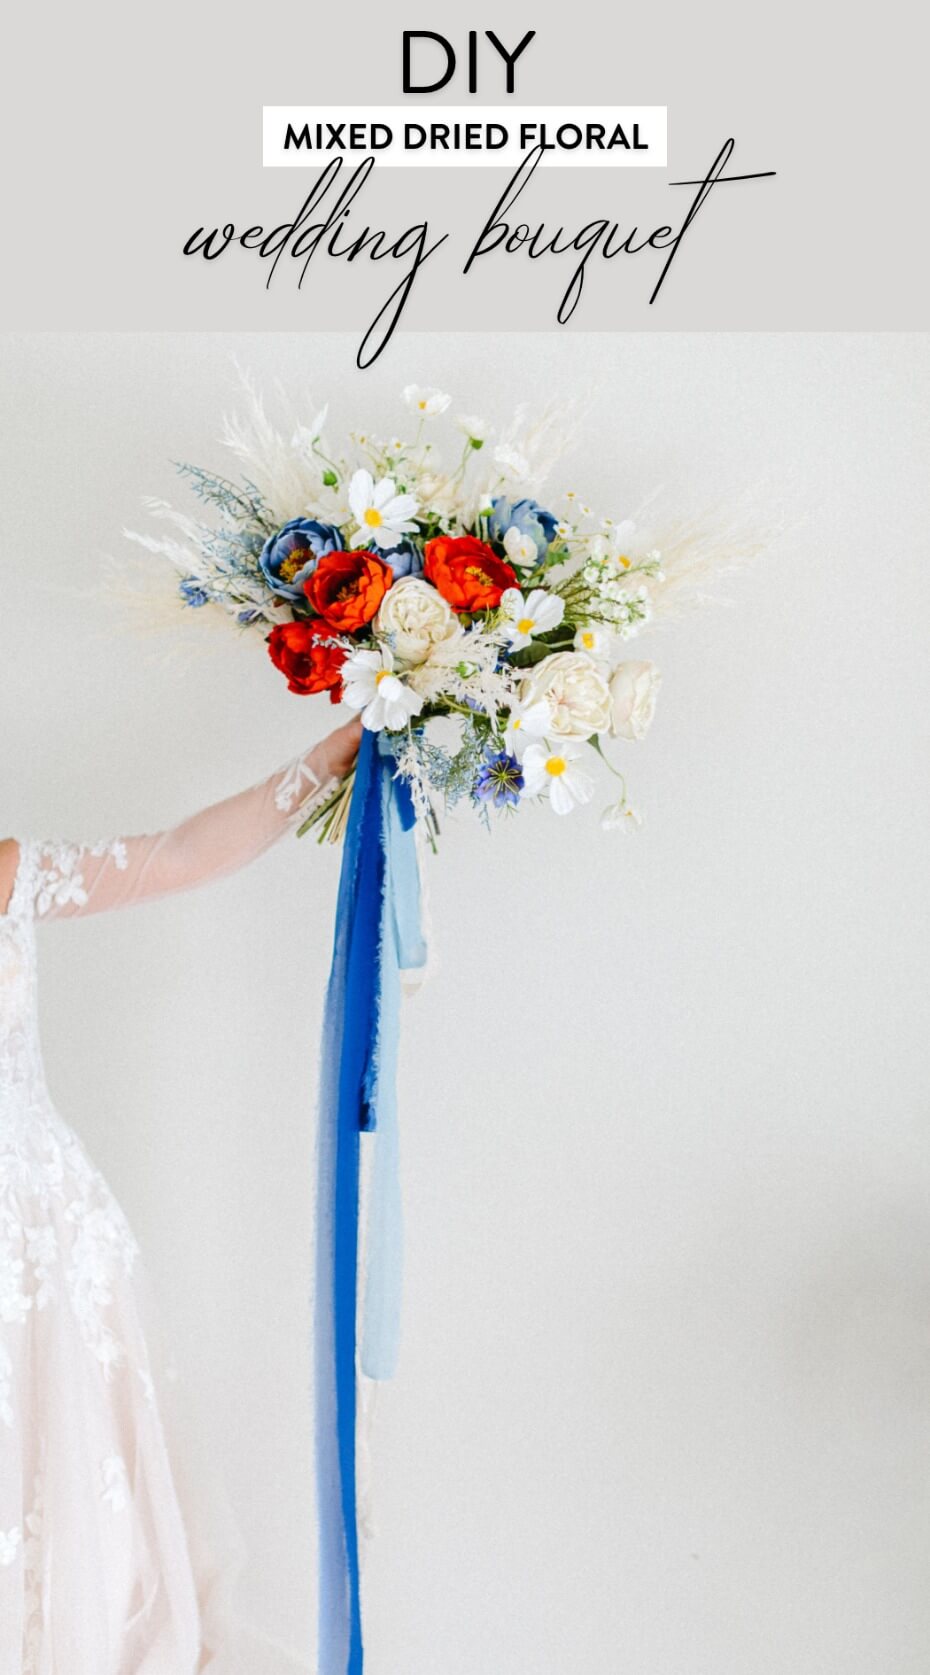 DIY mixed dried floral wedding bouquet